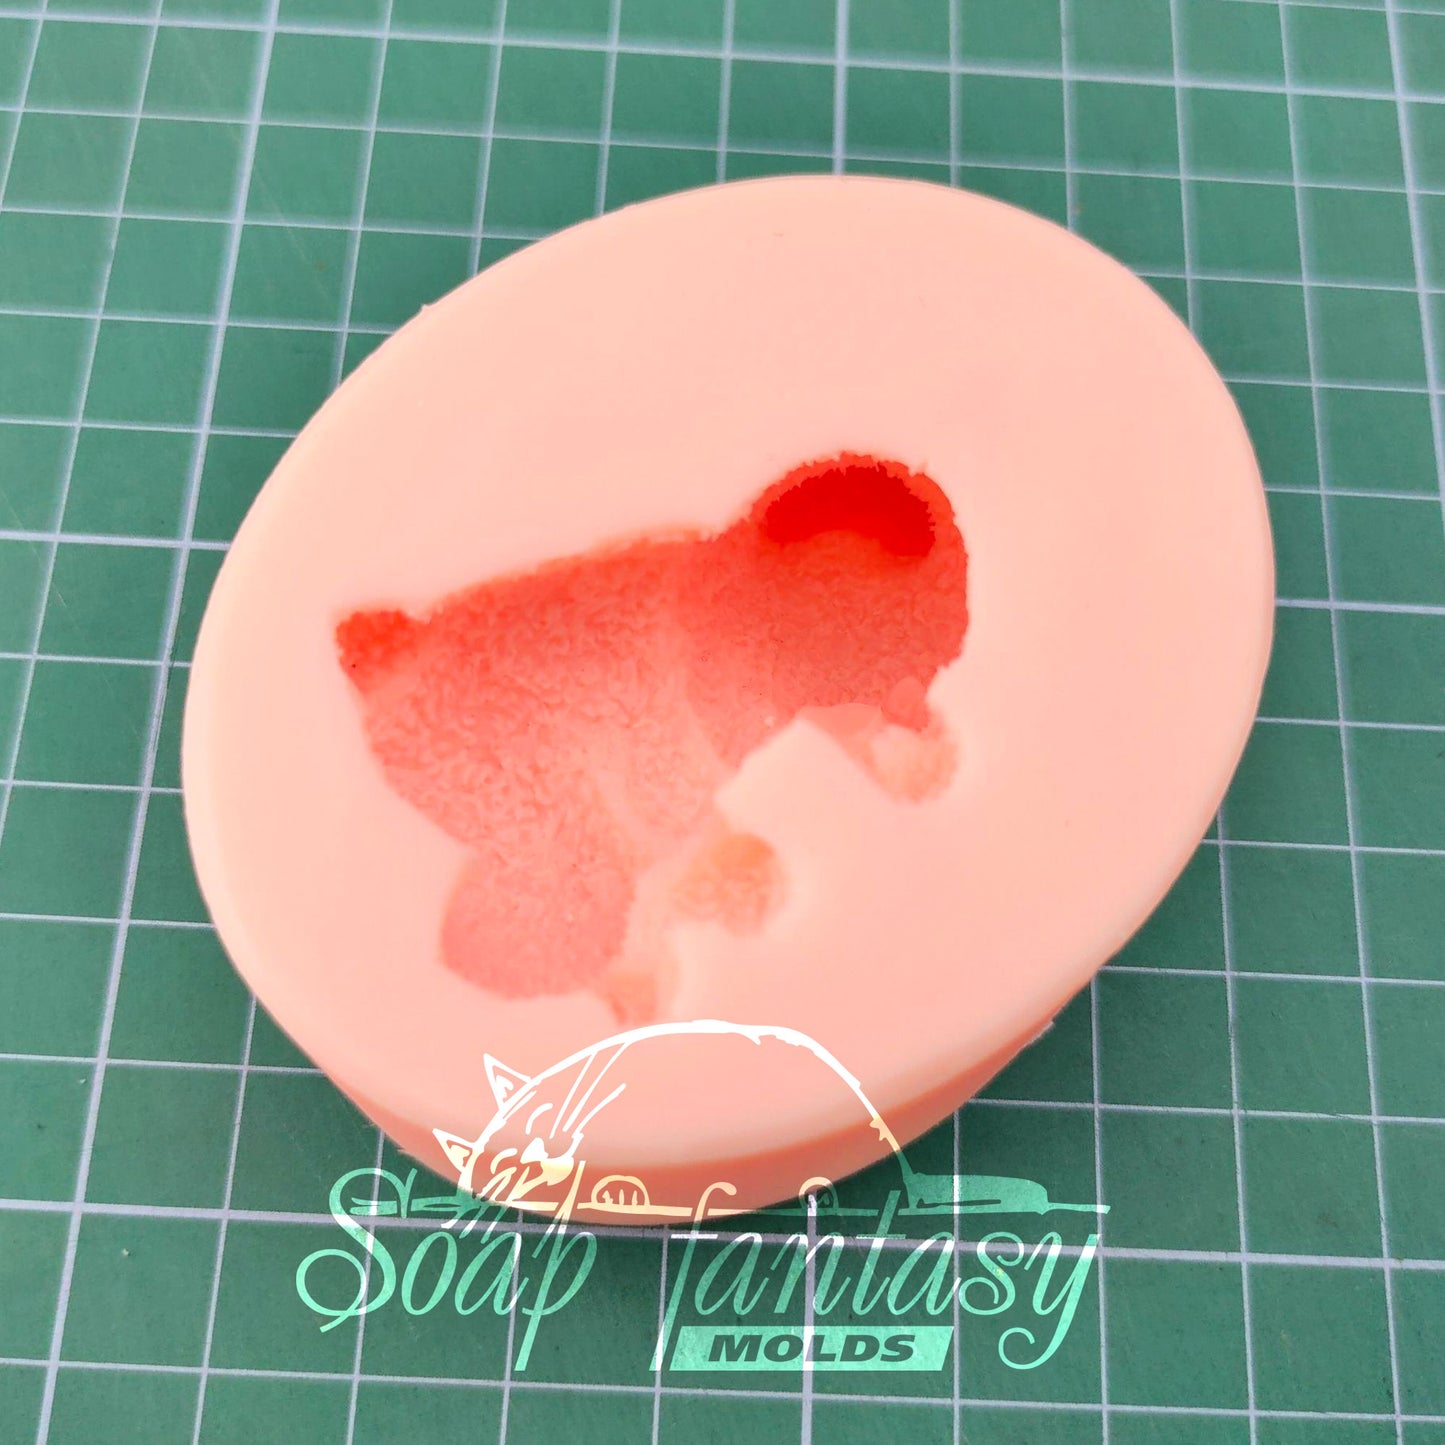 Sleeping bunny "Zephyr" silicone mold for soap making